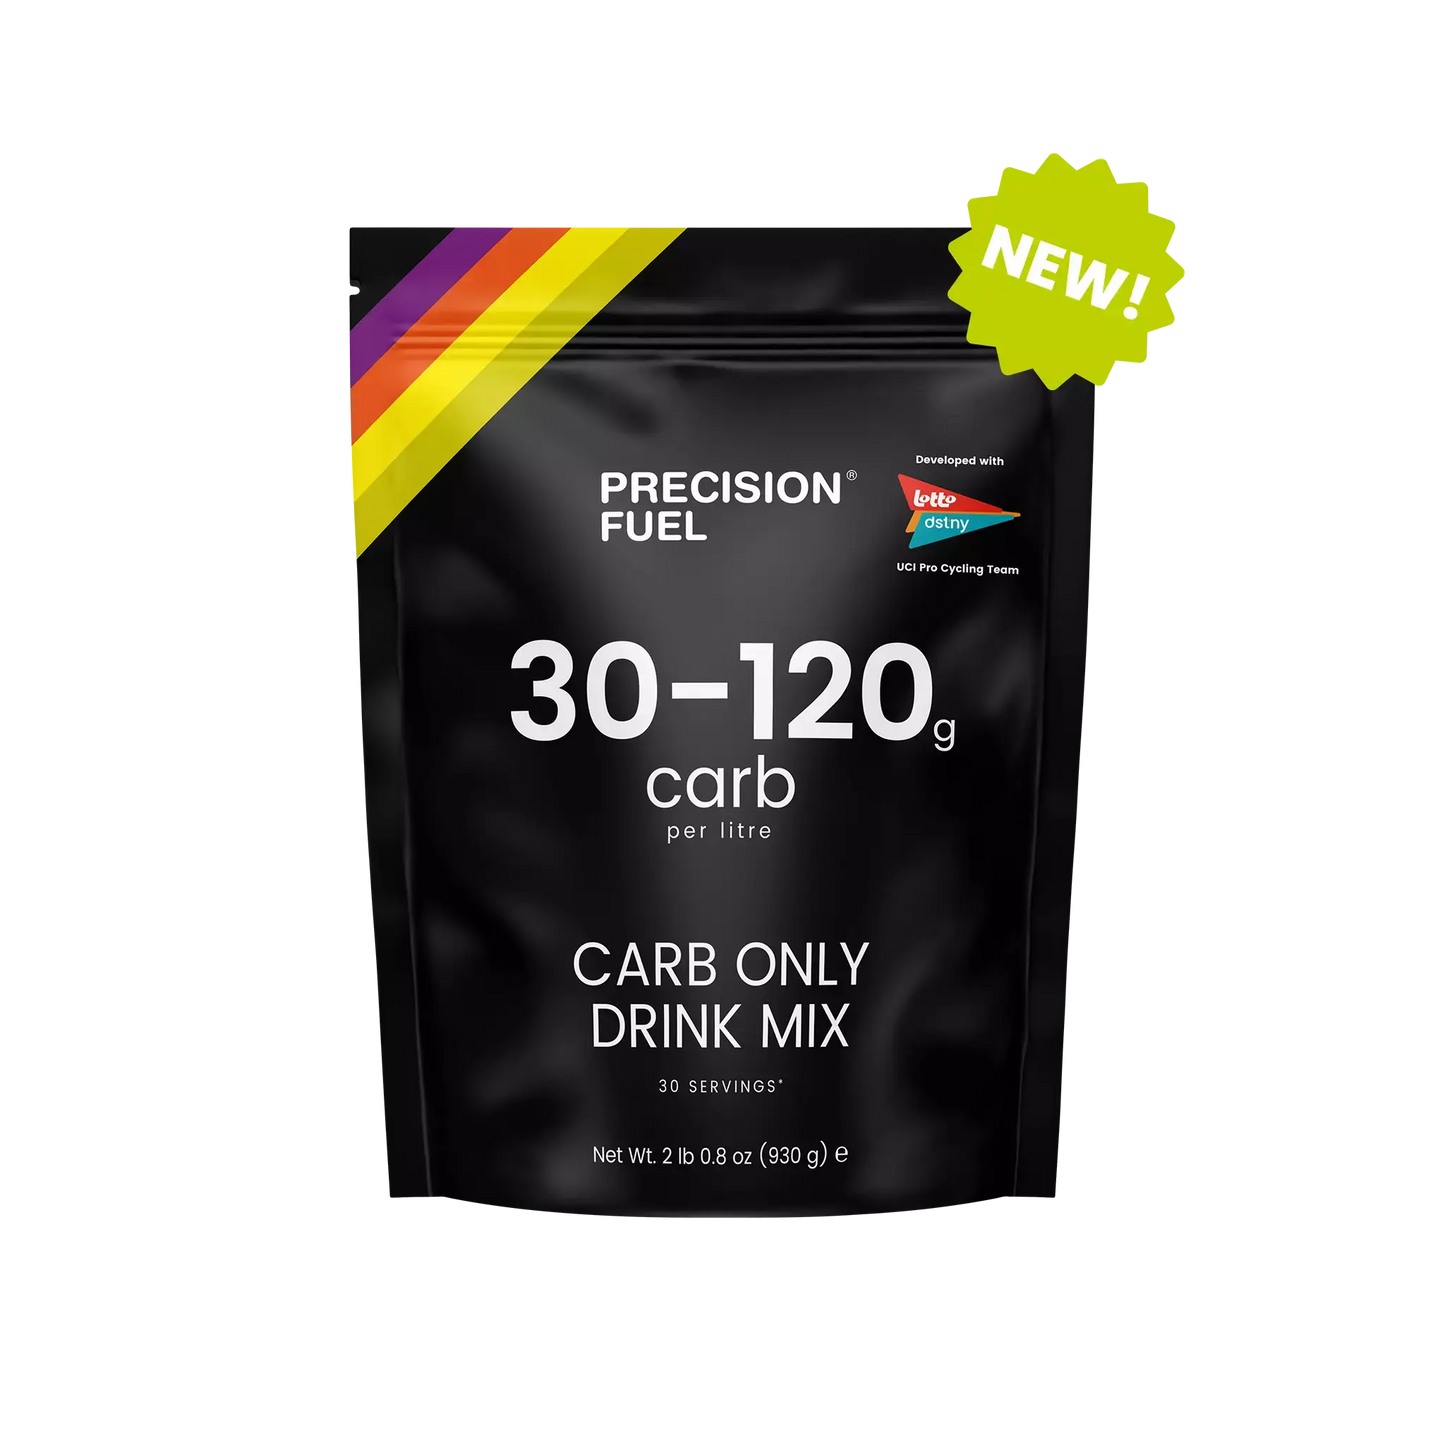 Precision Fuel Carb Only Drink Mix - Bag of 30 servings